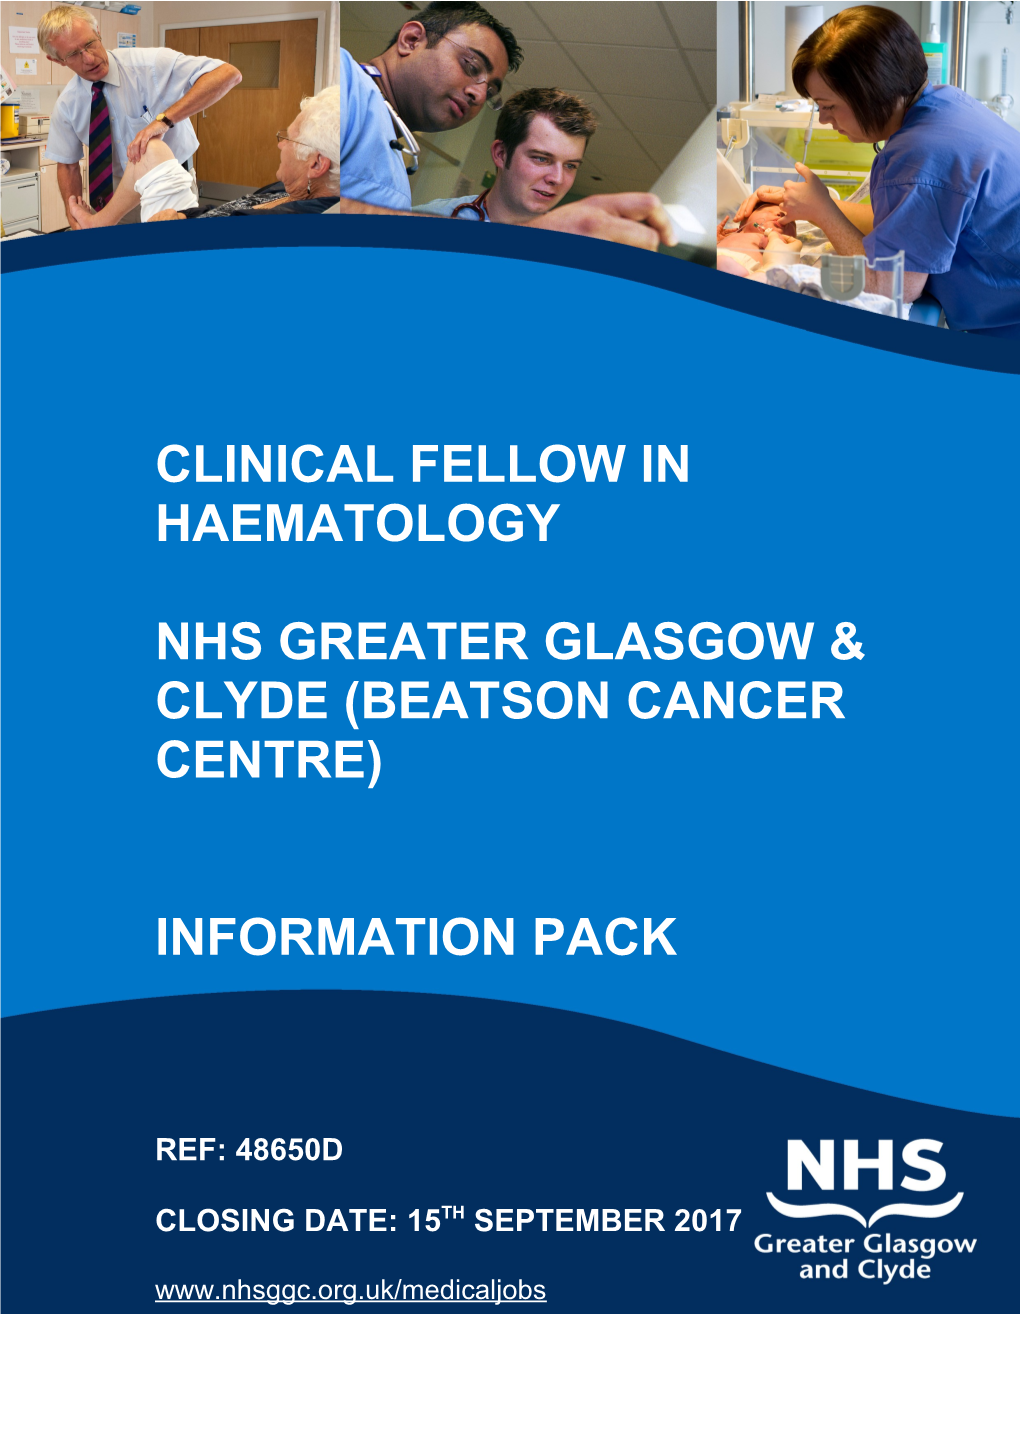 Nhs Greater Glasgow & Clyde(Beatson Cancer Centre)